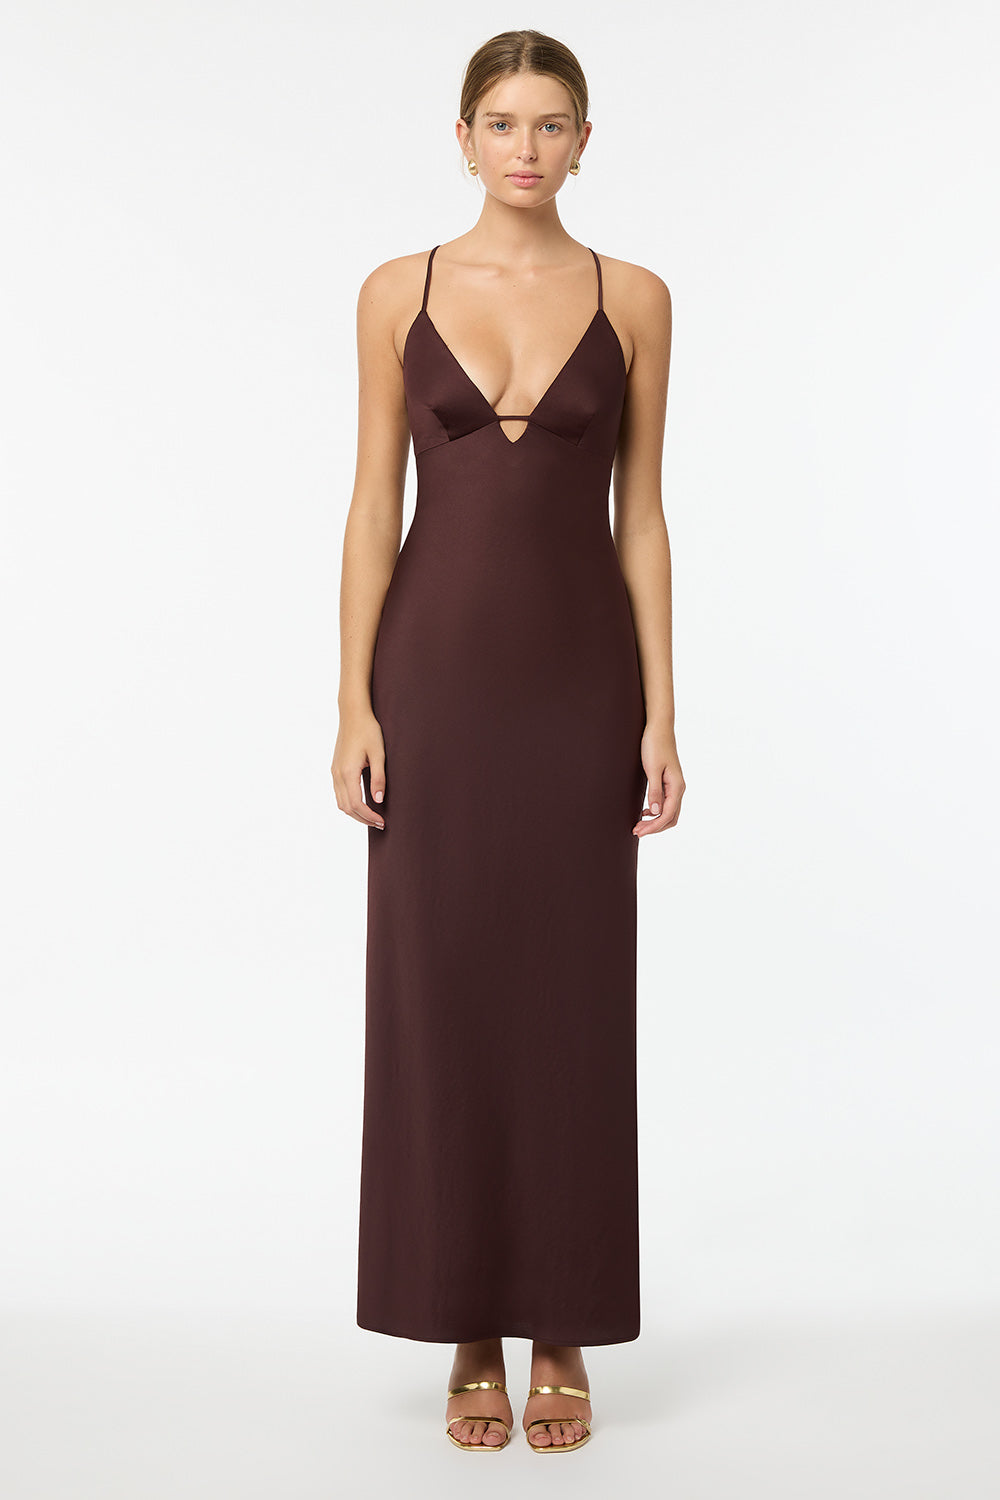 Manning Cartell Time to Shine Slip Dress in Truffle